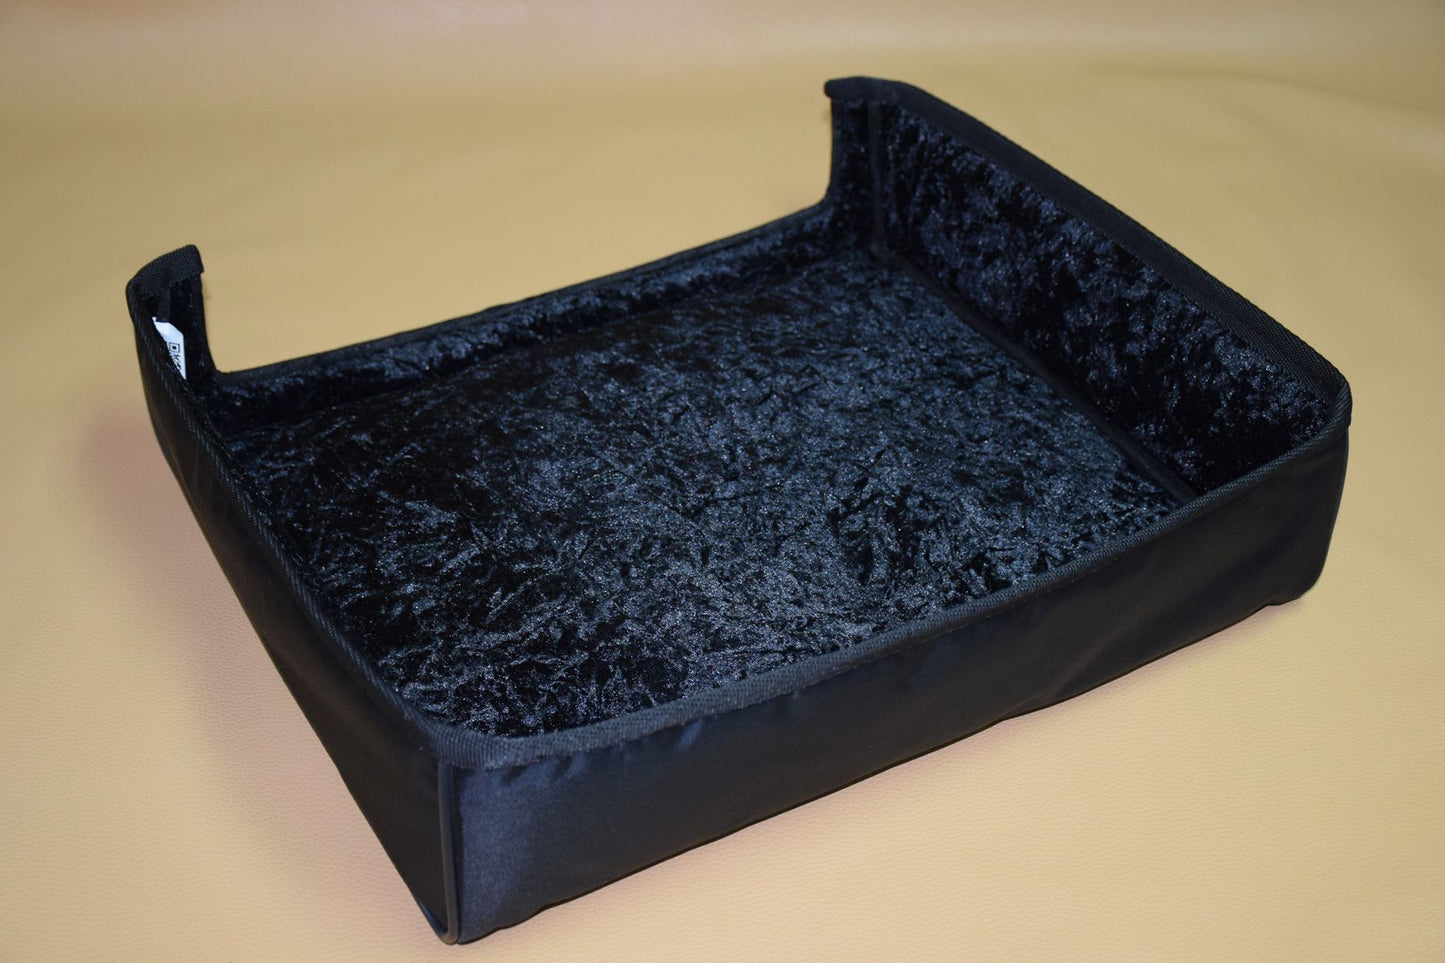 Custom padded cover for GIG TURNTABLE CR6035A (With Speakers)